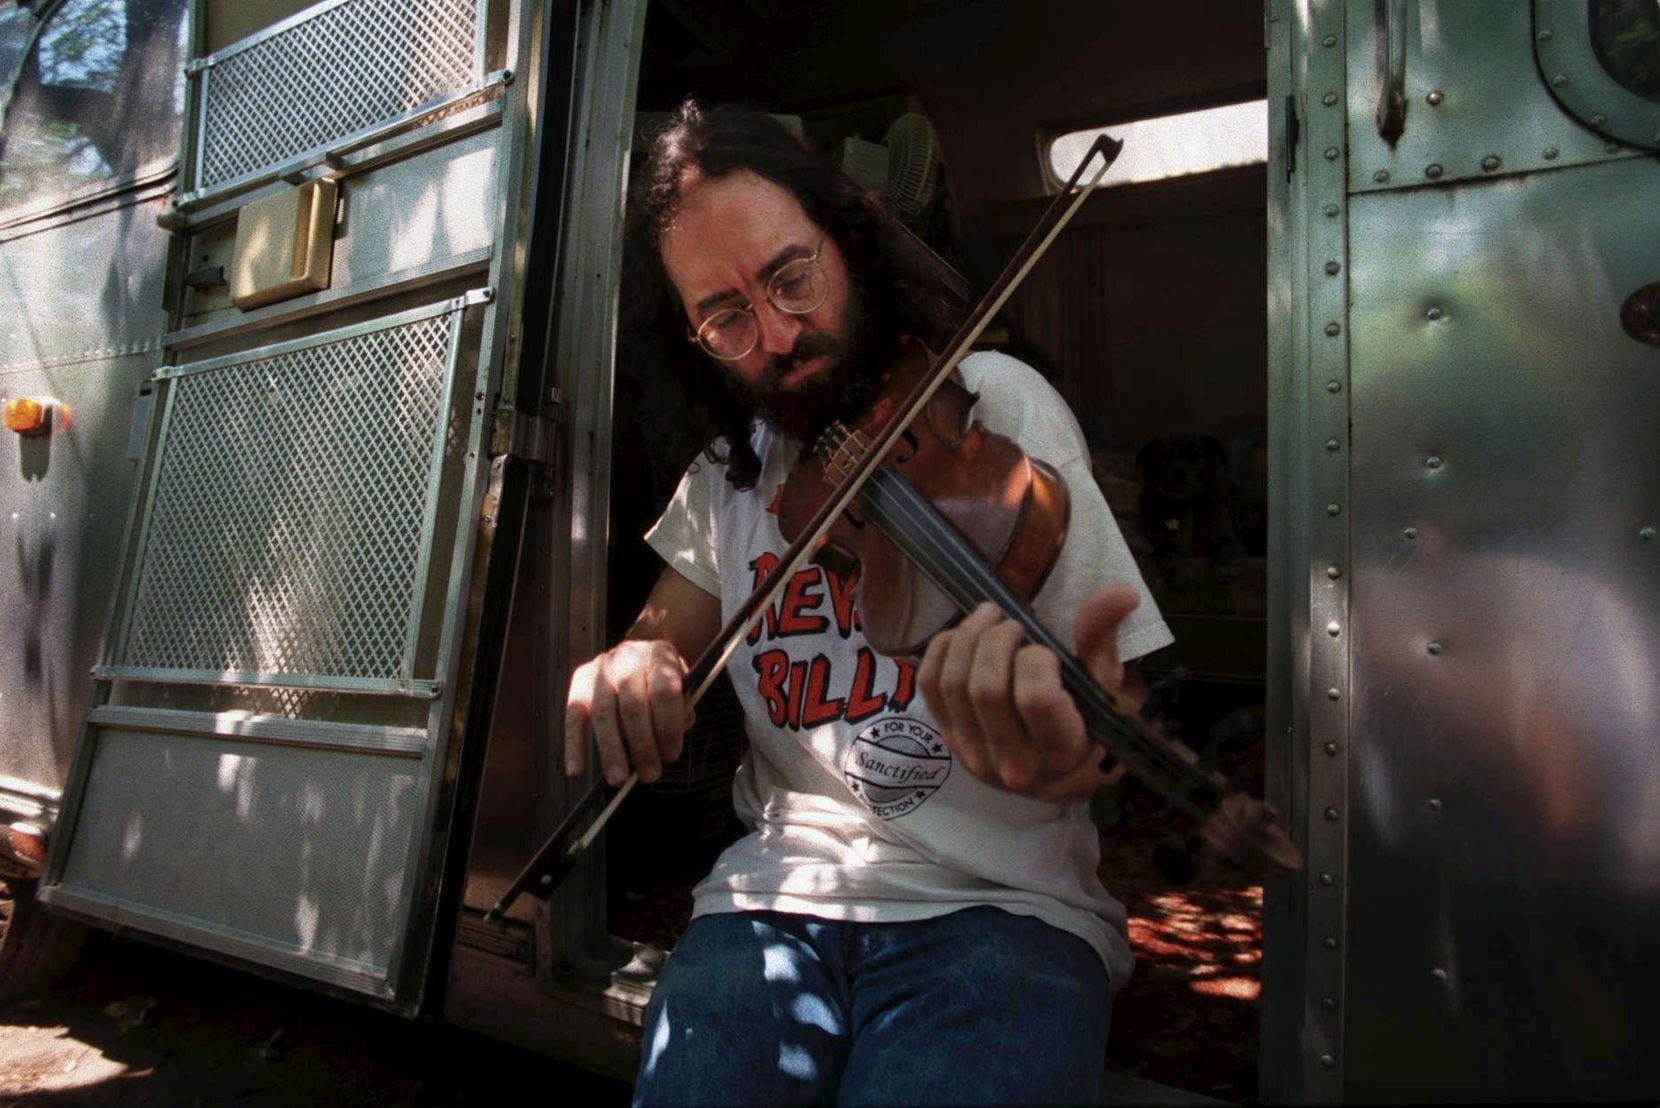 Austin folk-rock musician James McMurtry worked on learning the fiddle in 1998 while...